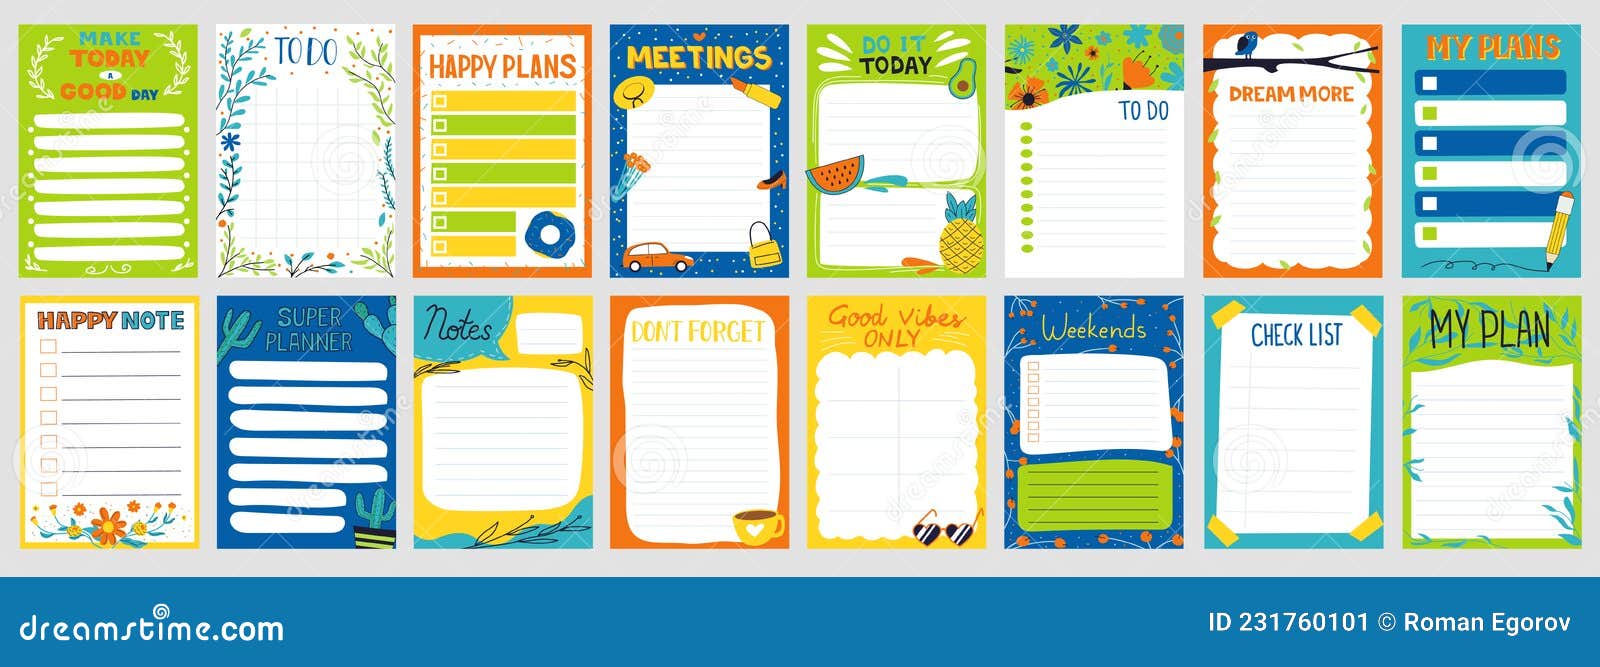 cute planner. notepad to do list. paper page with colorful decoration. schedule card and memo mockup. organizer sheets